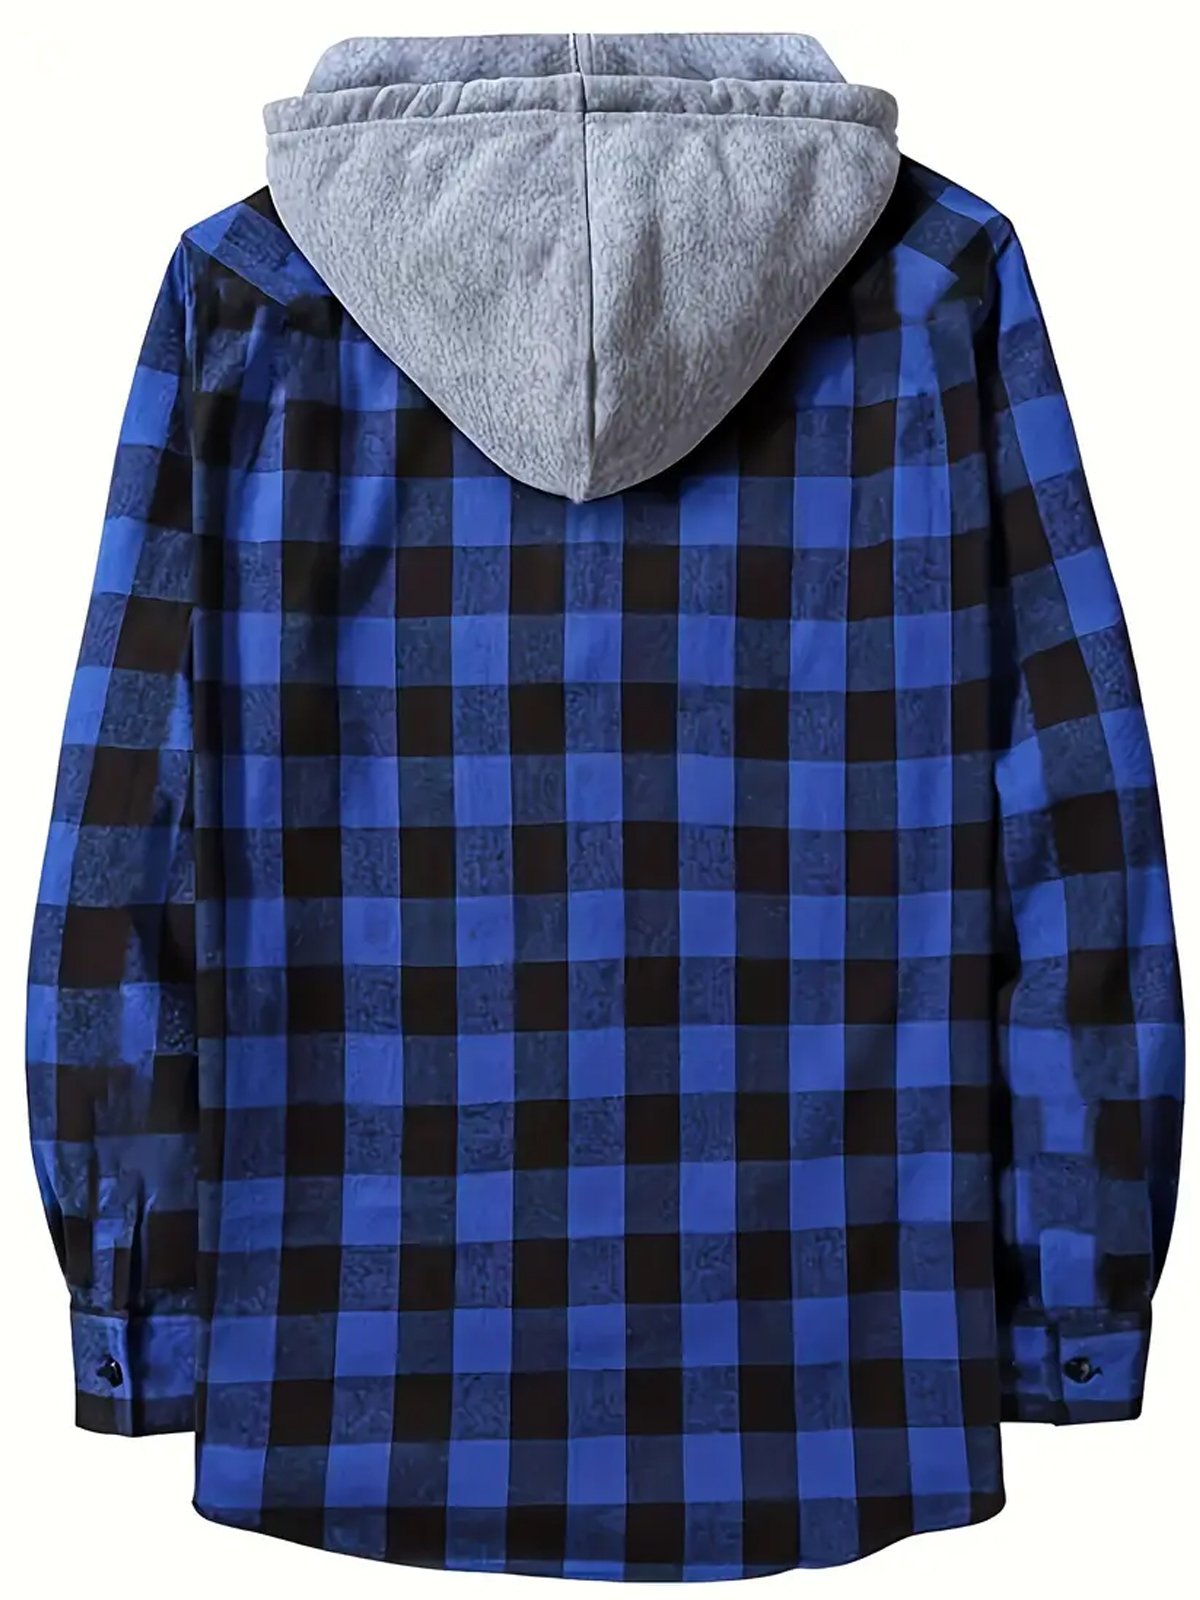 Royaura Plaid Pattern Men's Long Sleeve Hooded Shirt Jacket With Chest Pocket, Men's Casual Fall Winter Outwear